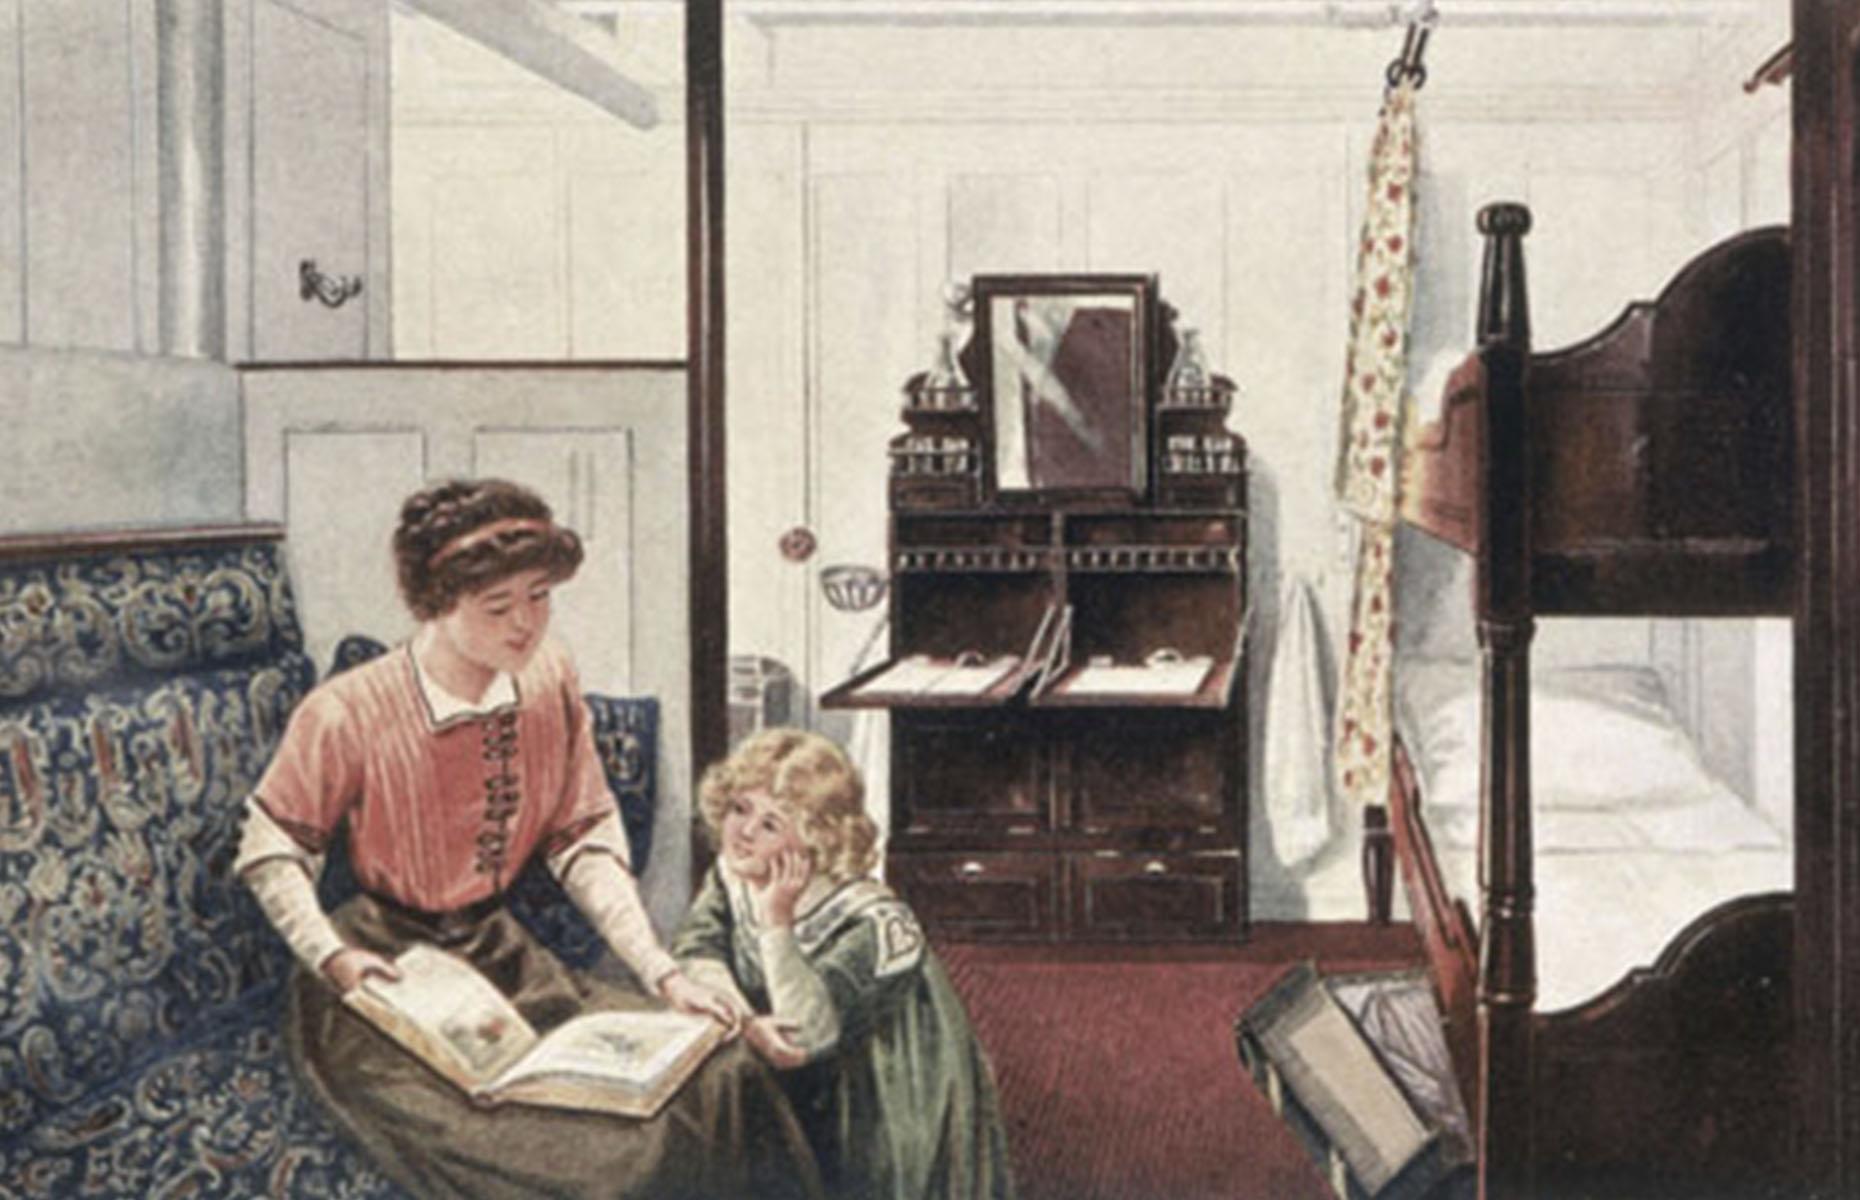 Living a little more luxuriously, second-class passengers had comfortable cabins with shared bathrooms, access to a library, a men-only smoking room (common practice at the time), a large, handsome dining room and promenade decks. Pictured is a period illustration of a second-class stateroom on the RMS Titanic.